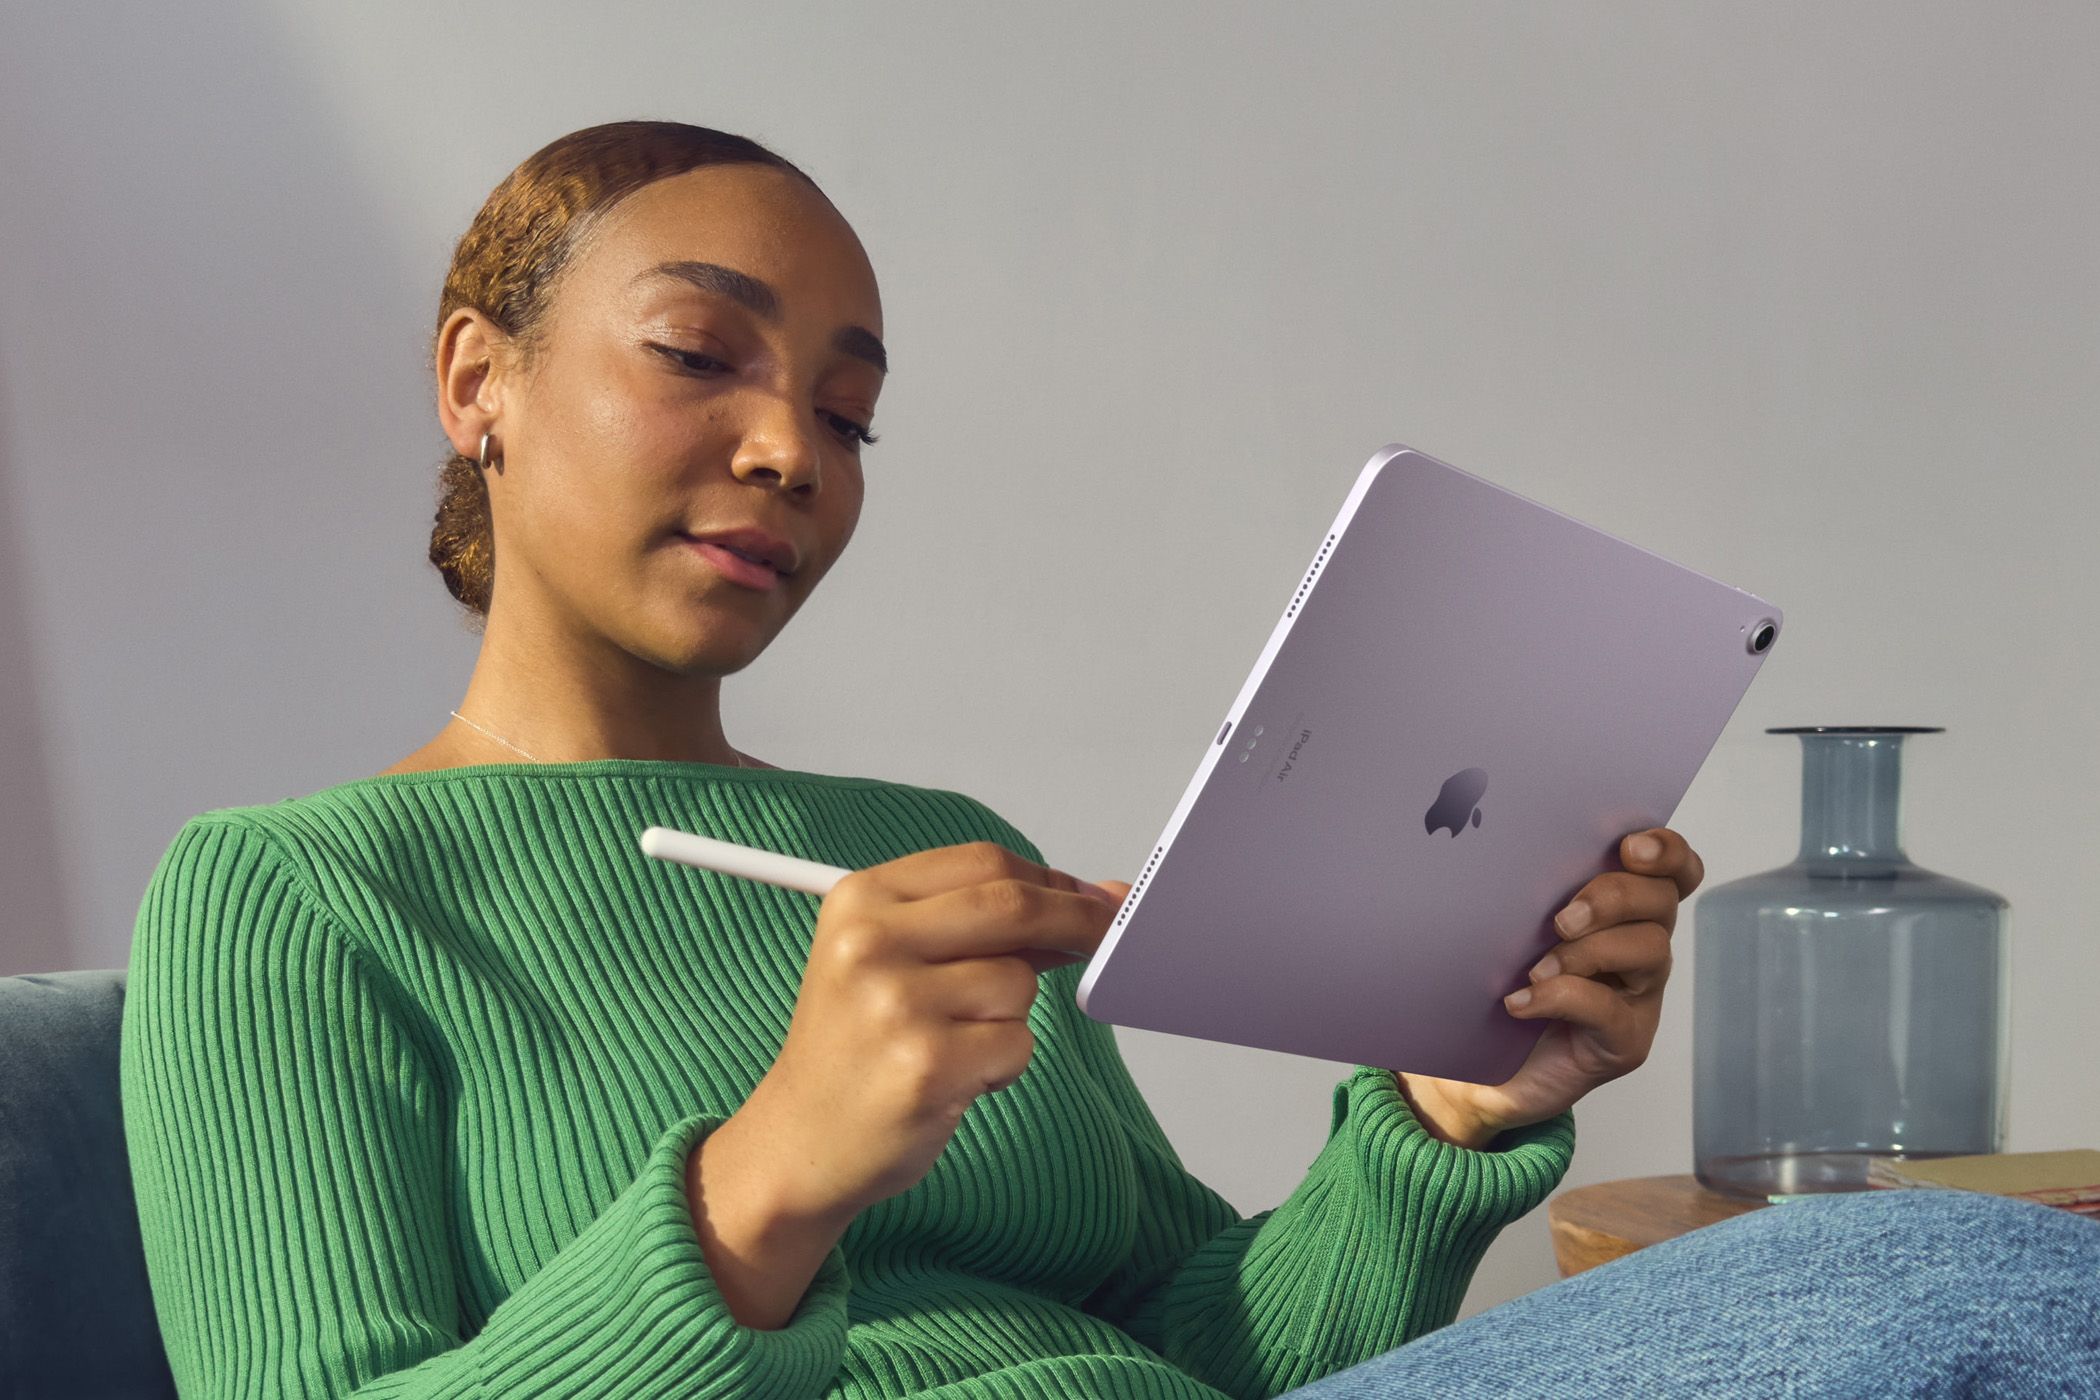 Person in green sweater using an iPad with the Apple Pencil.